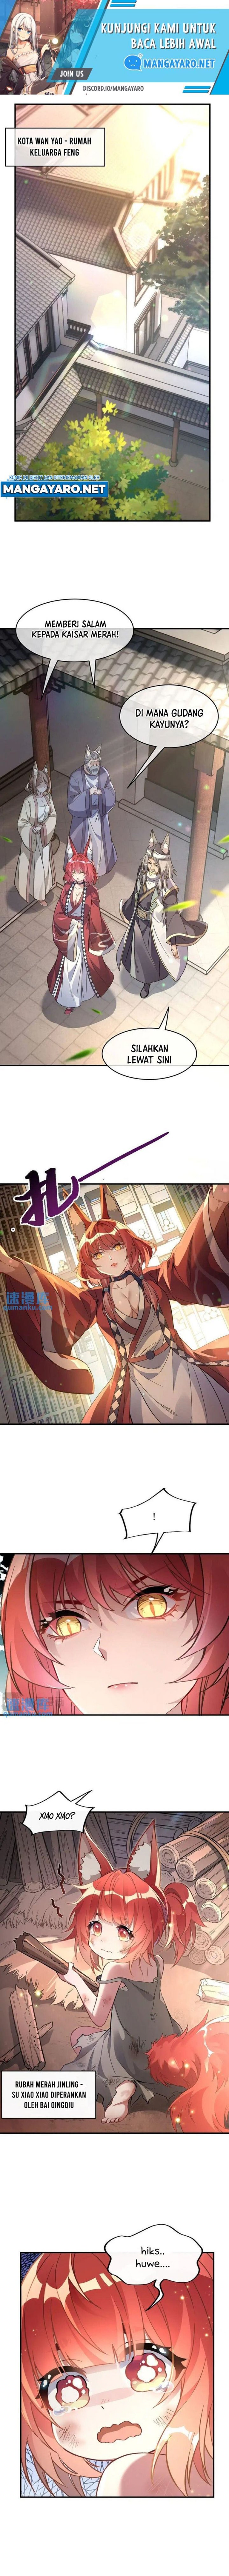 Dilarang COPAS - situs resmi www.mangacanblog.com - Komik my female apprentices are all big shots from the future 209 - chapter 209 210 Indonesia my female apprentices are all big shots from the future 209 - chapter 209 Terbaru 1|Baca Manga Komik Indonesia|Mangacan